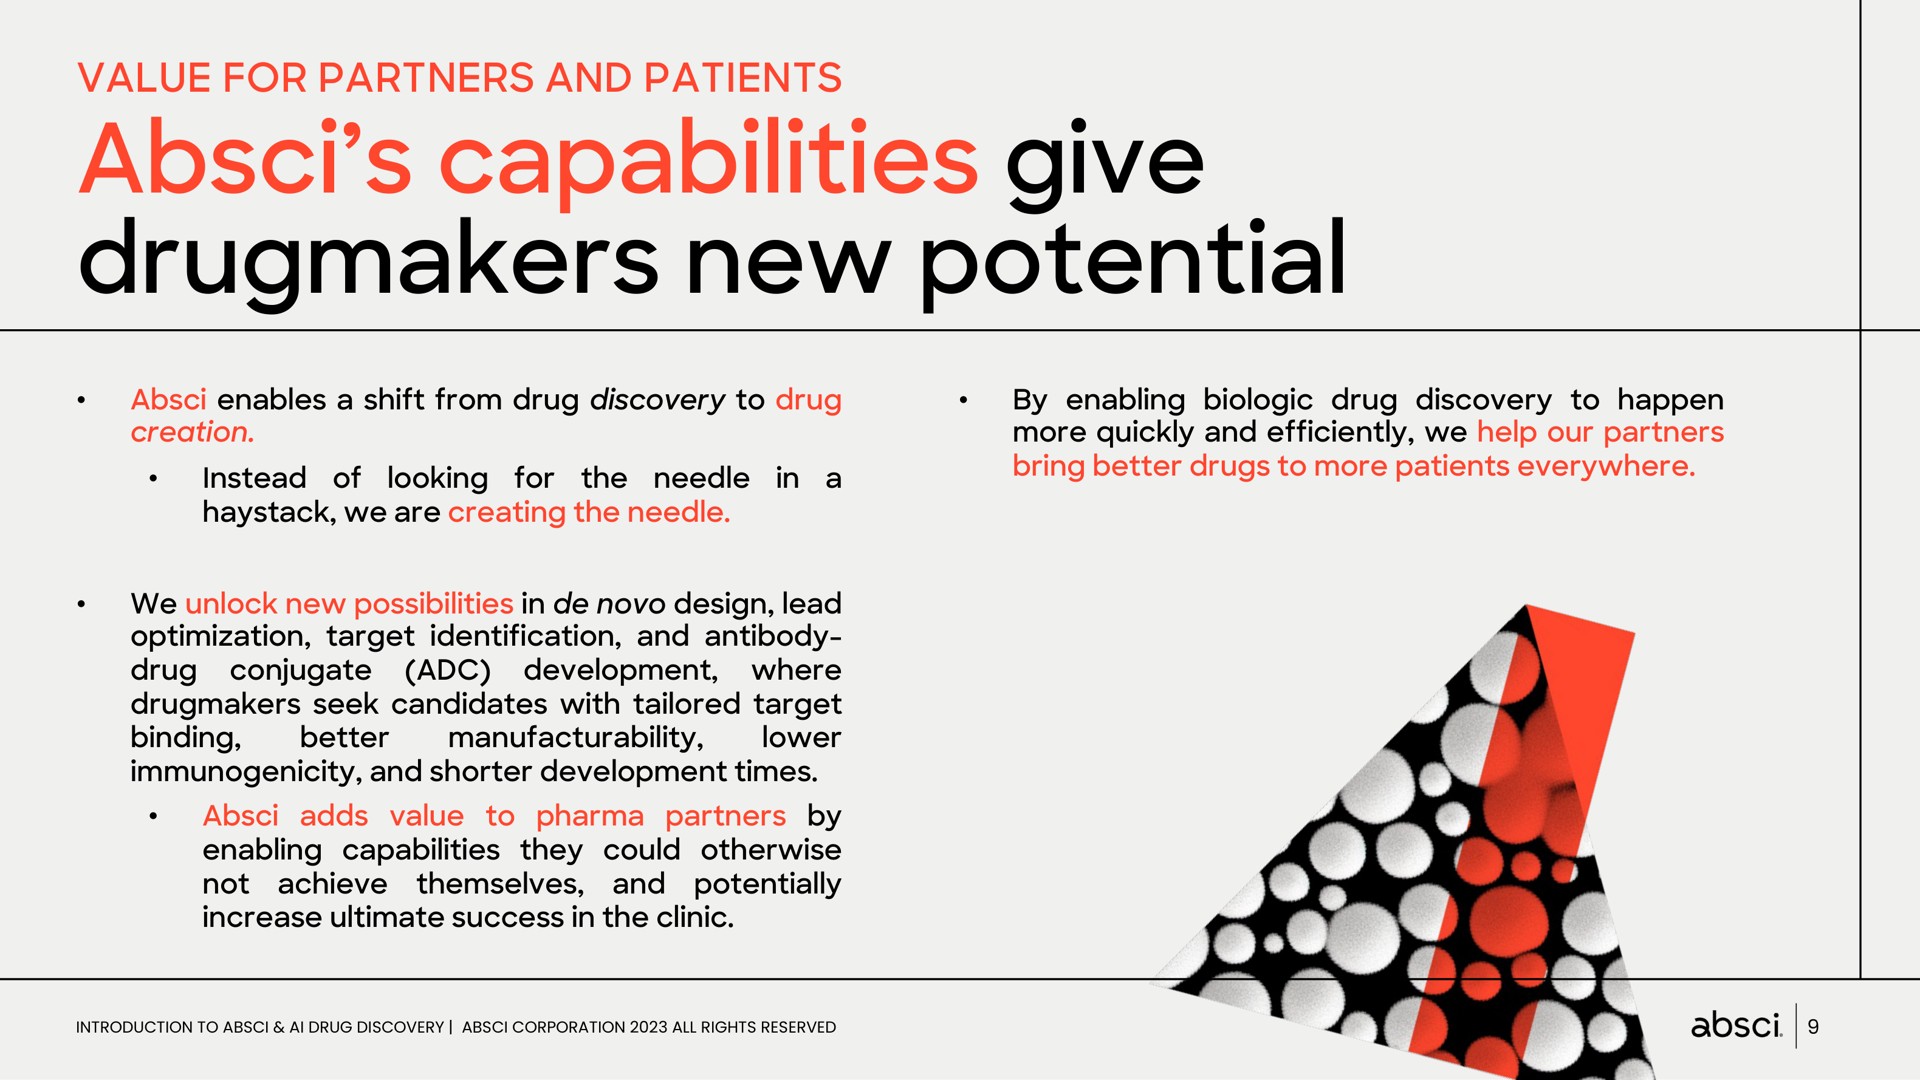 value for partners and patients capabilities give new potential | Absci